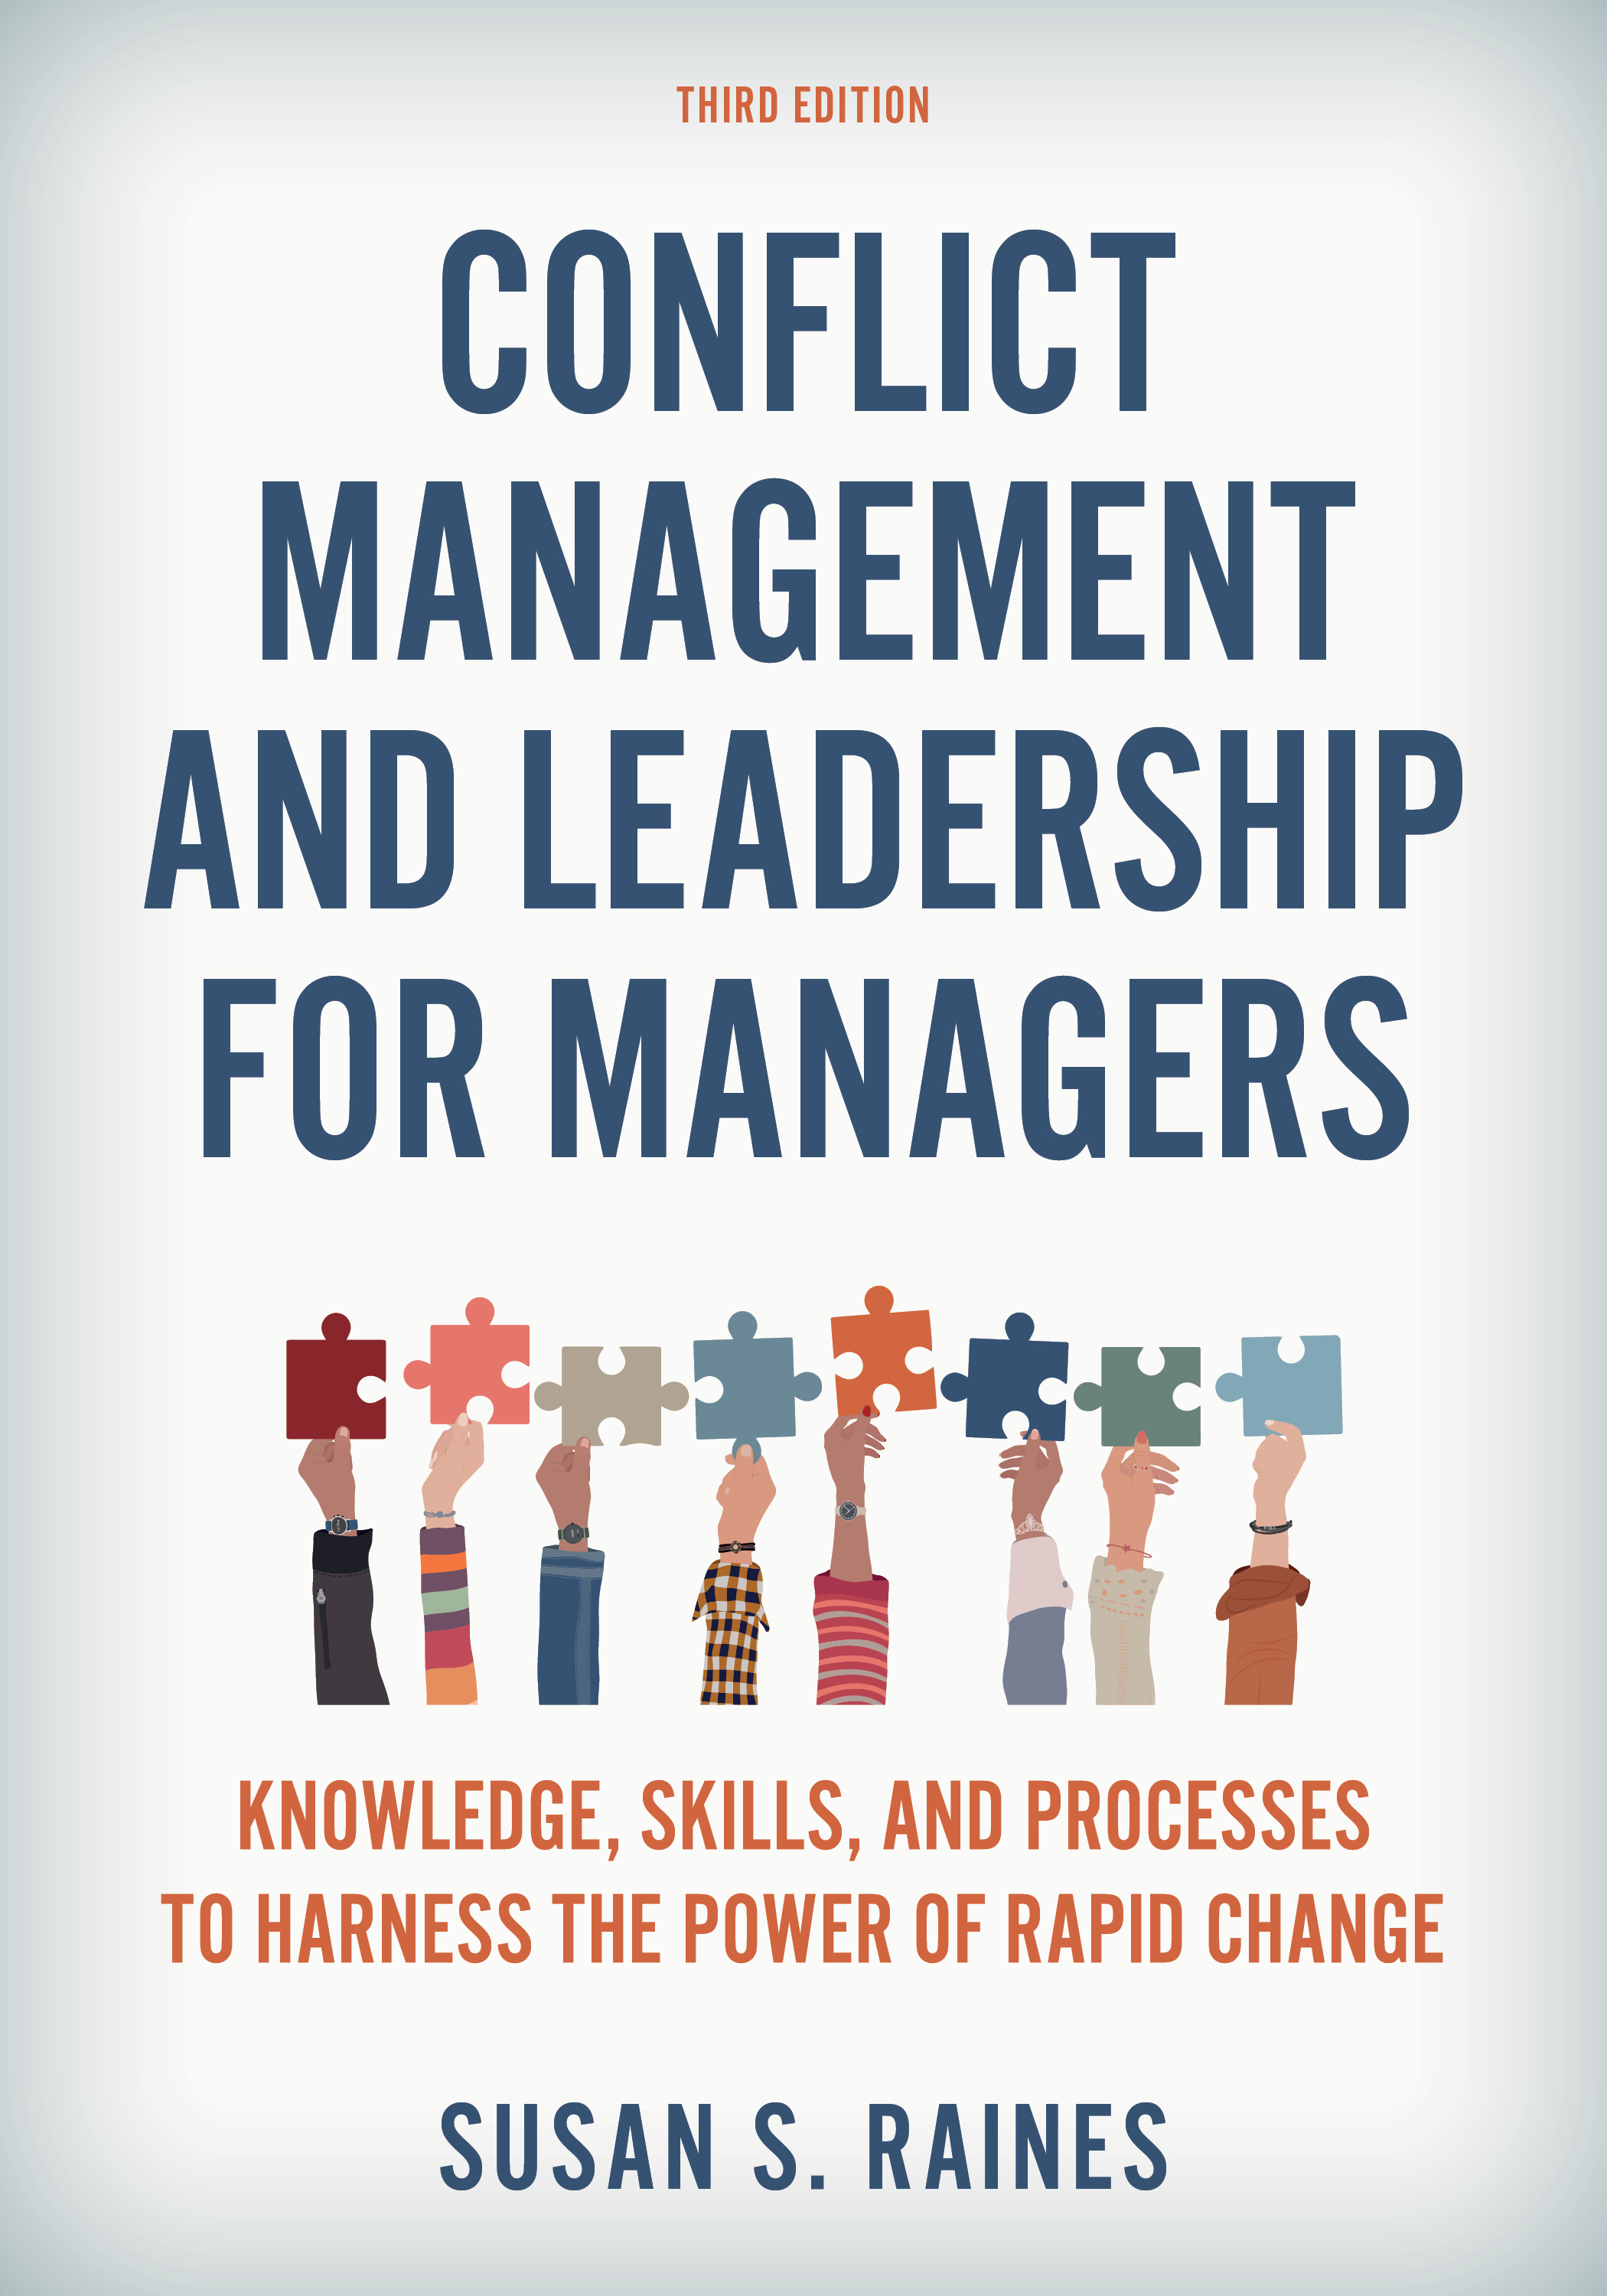 Conflict Management and Leadership for Managers: Knowledge, Skills, and Processes to Harness the Power of Rapid Change